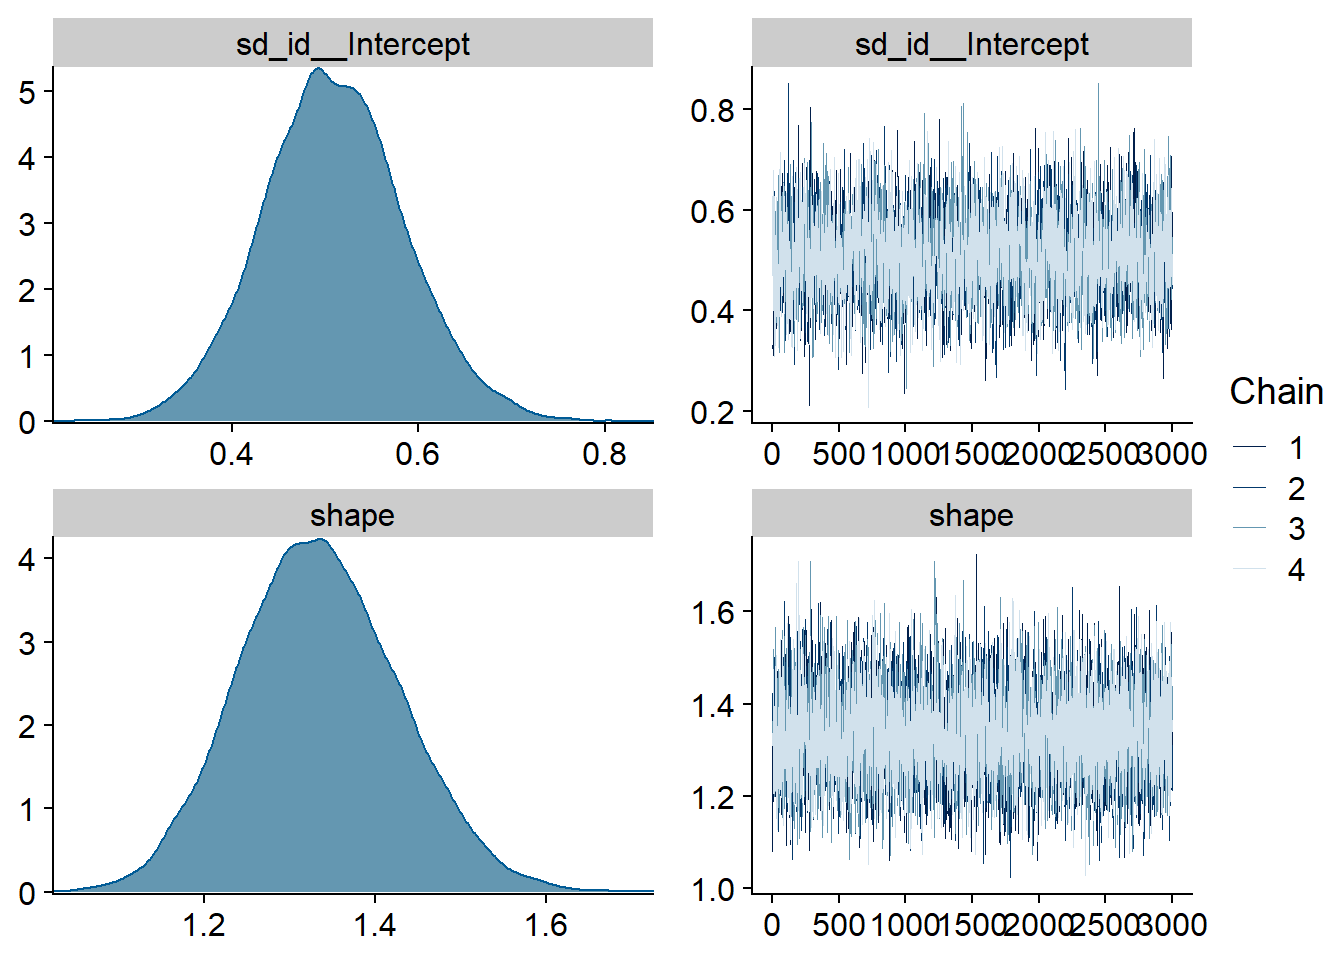 Traceplots and posterior distributions for Model 2